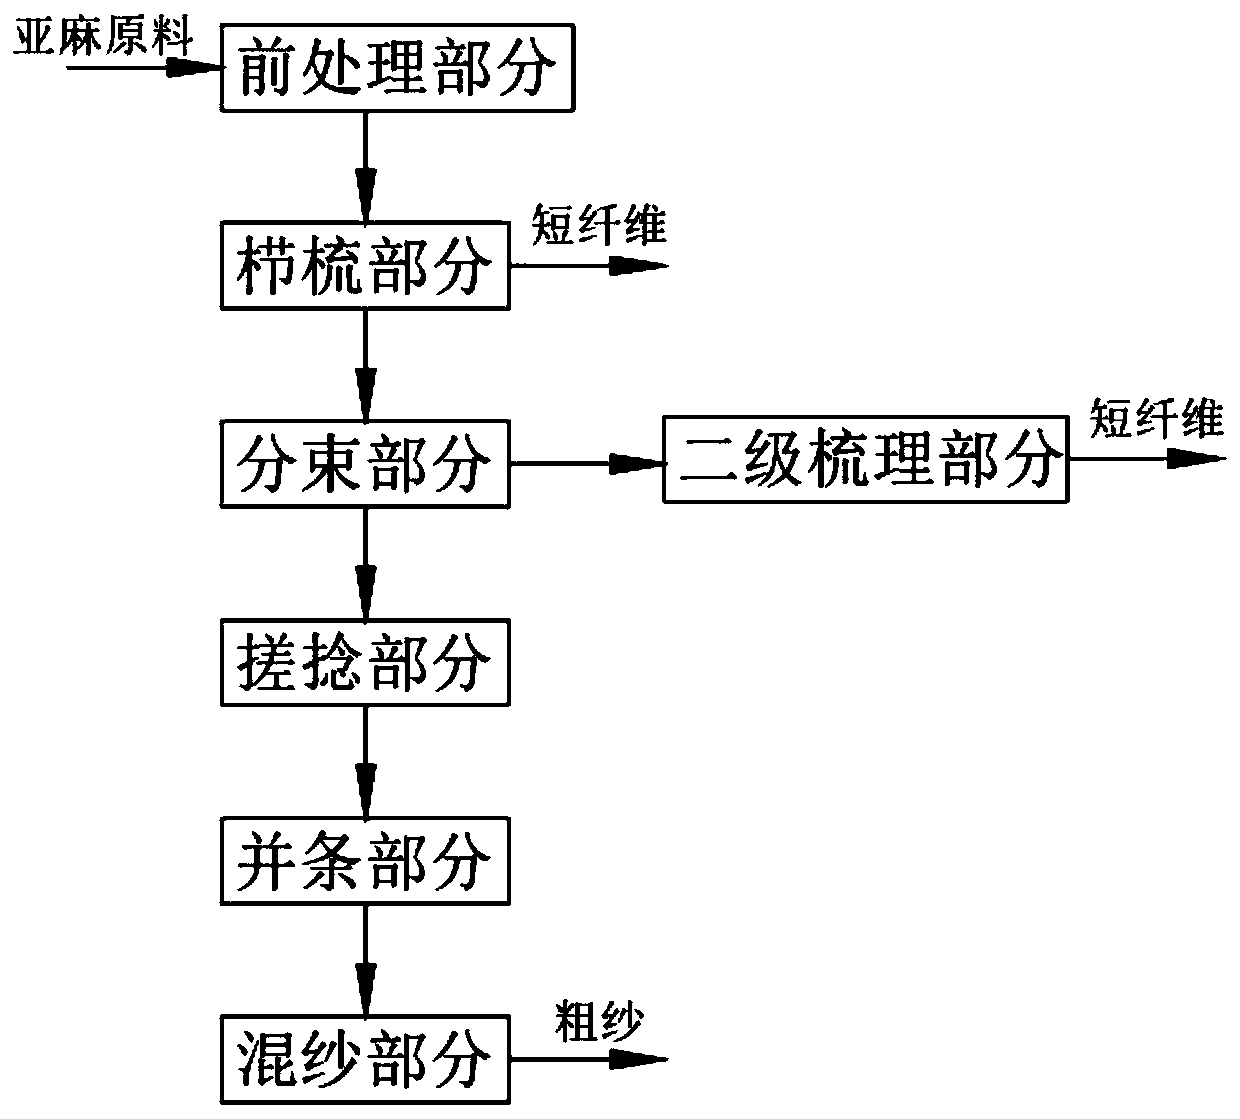 A continuous automatic production method of flax yarn